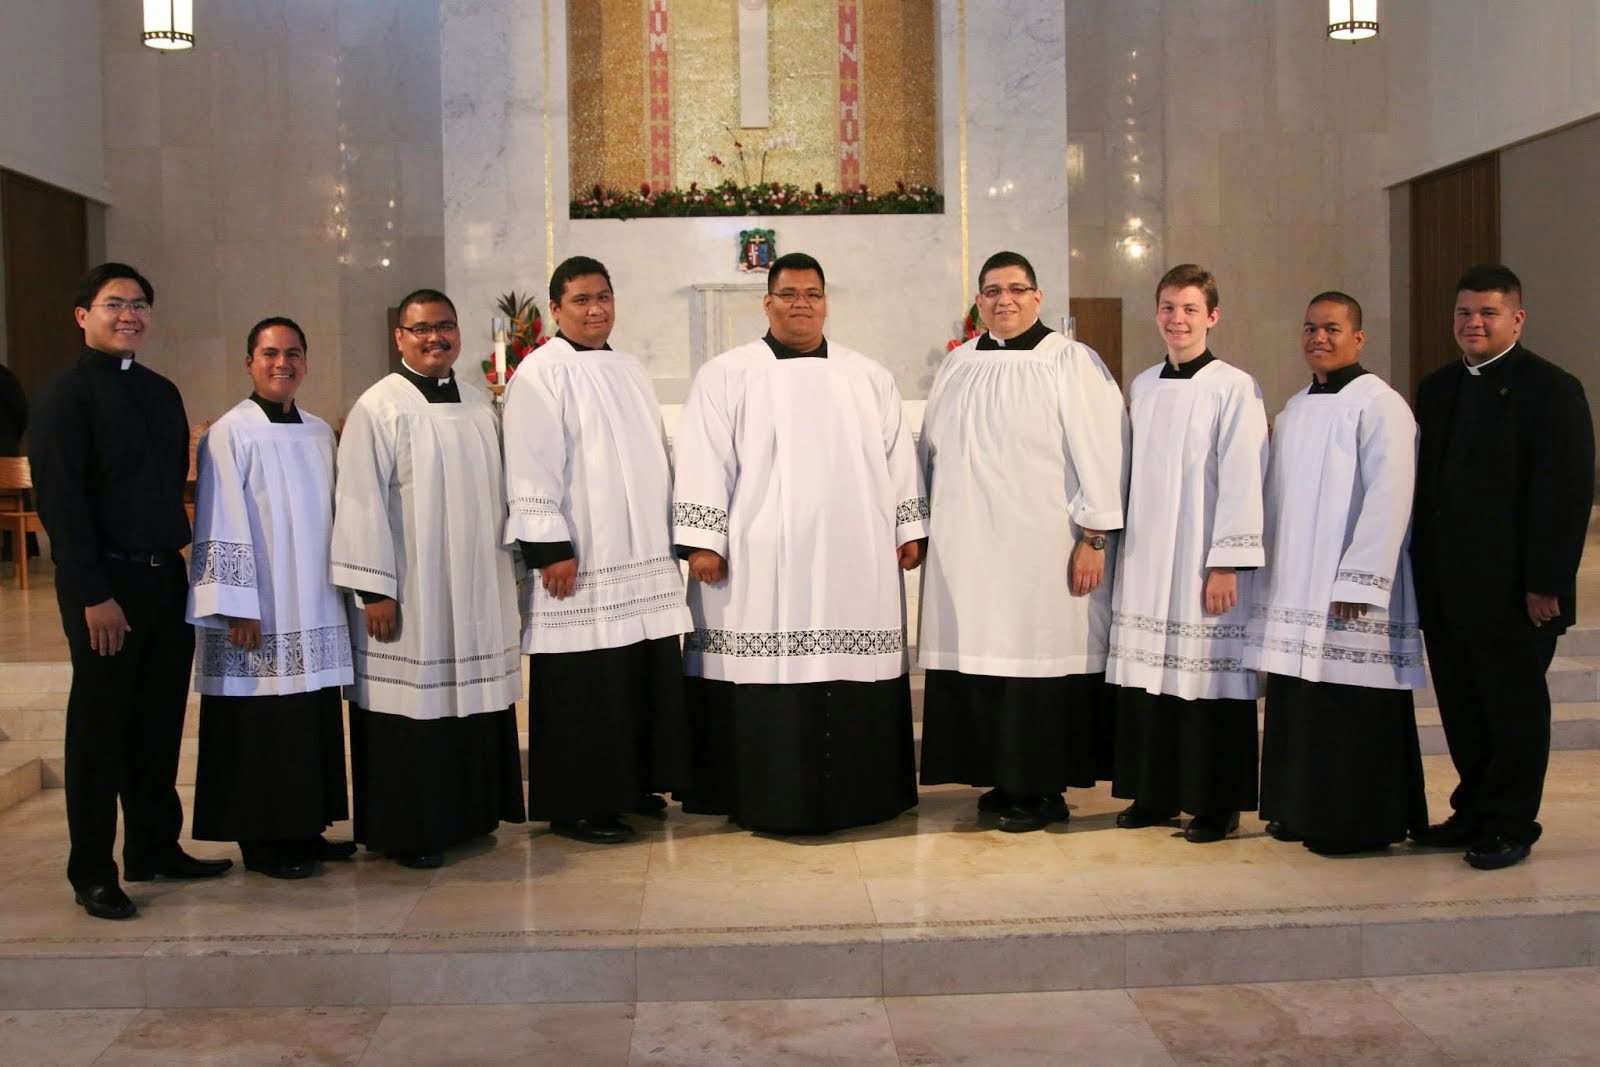 My Diocesan Brothers